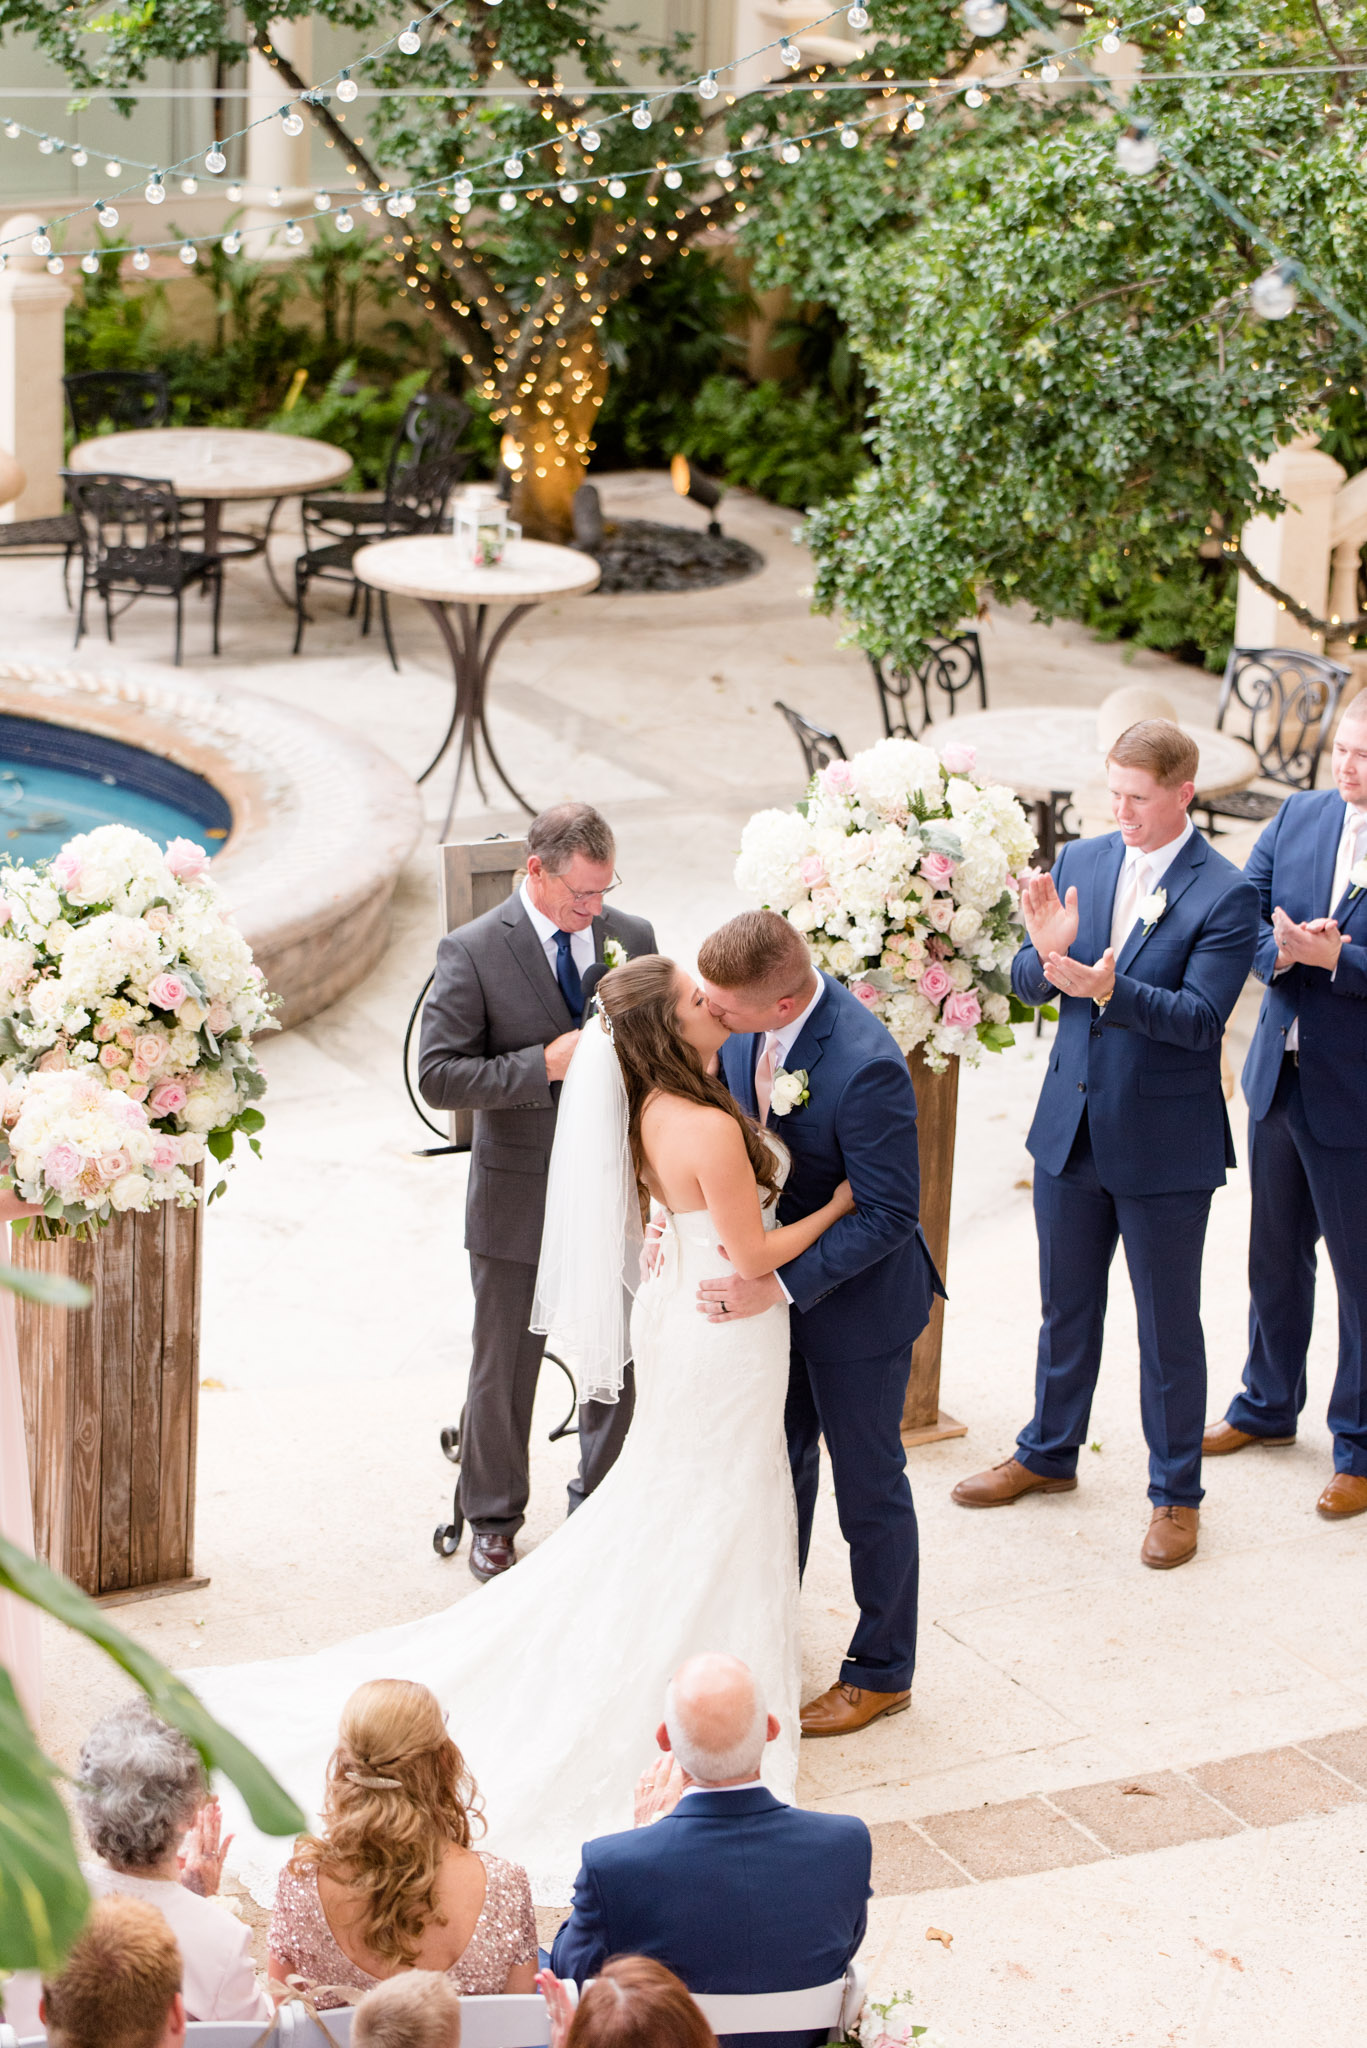 Bride and groom share first kiss as married couple.